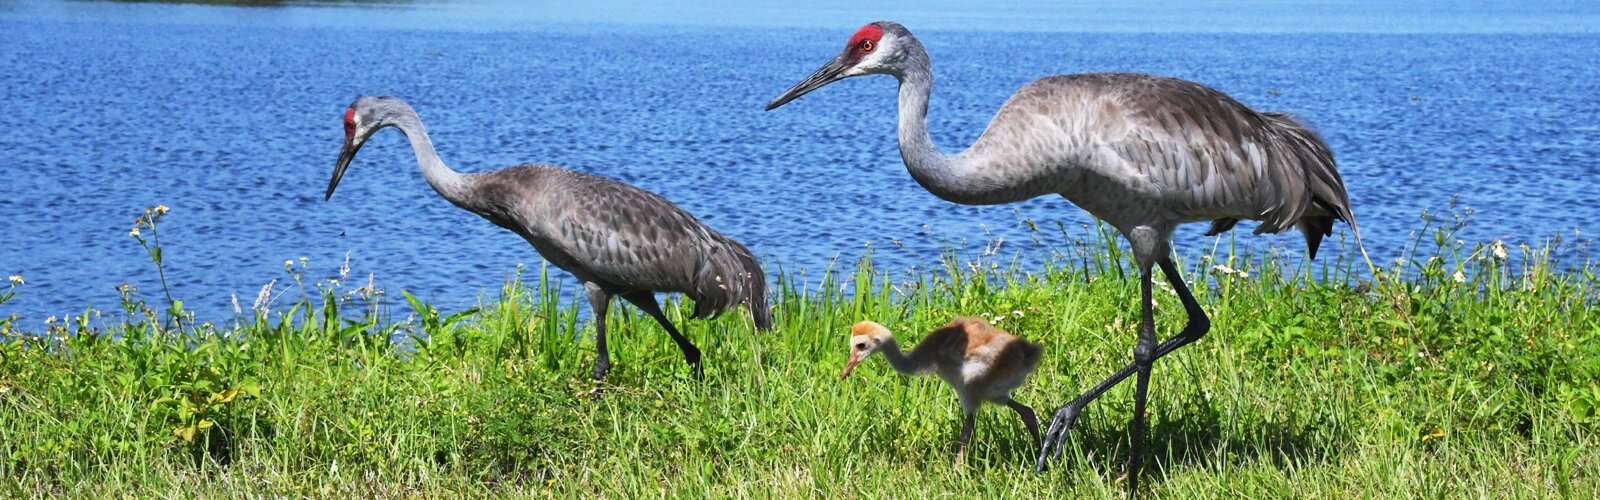 Foraging with mom and dad, a tiny sandhill crane colt learns and gets fed by both its devoted parents. Loss of habitat forces cranes to encroach on suburban areas where many dangers await them, and sometimes accidental death.